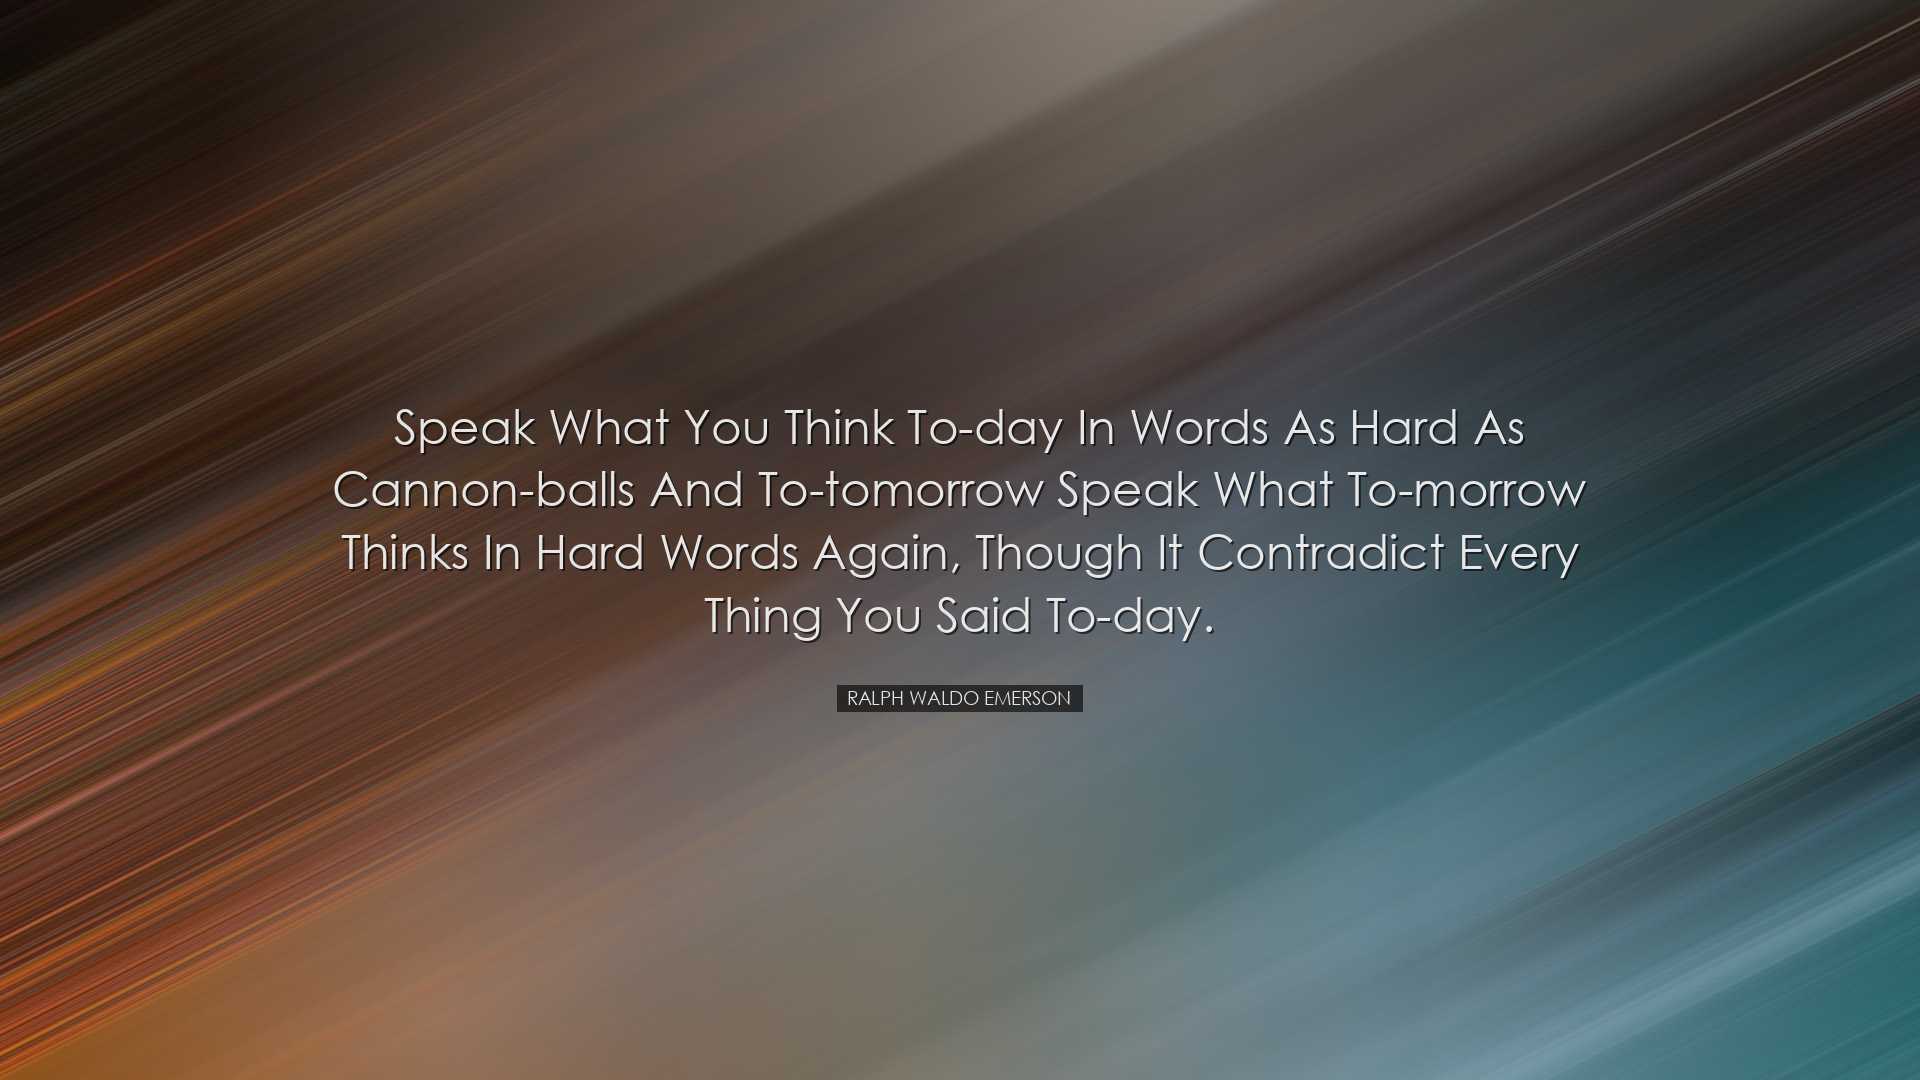 Speak what you think to-day in words as hard as cannon-balls and t